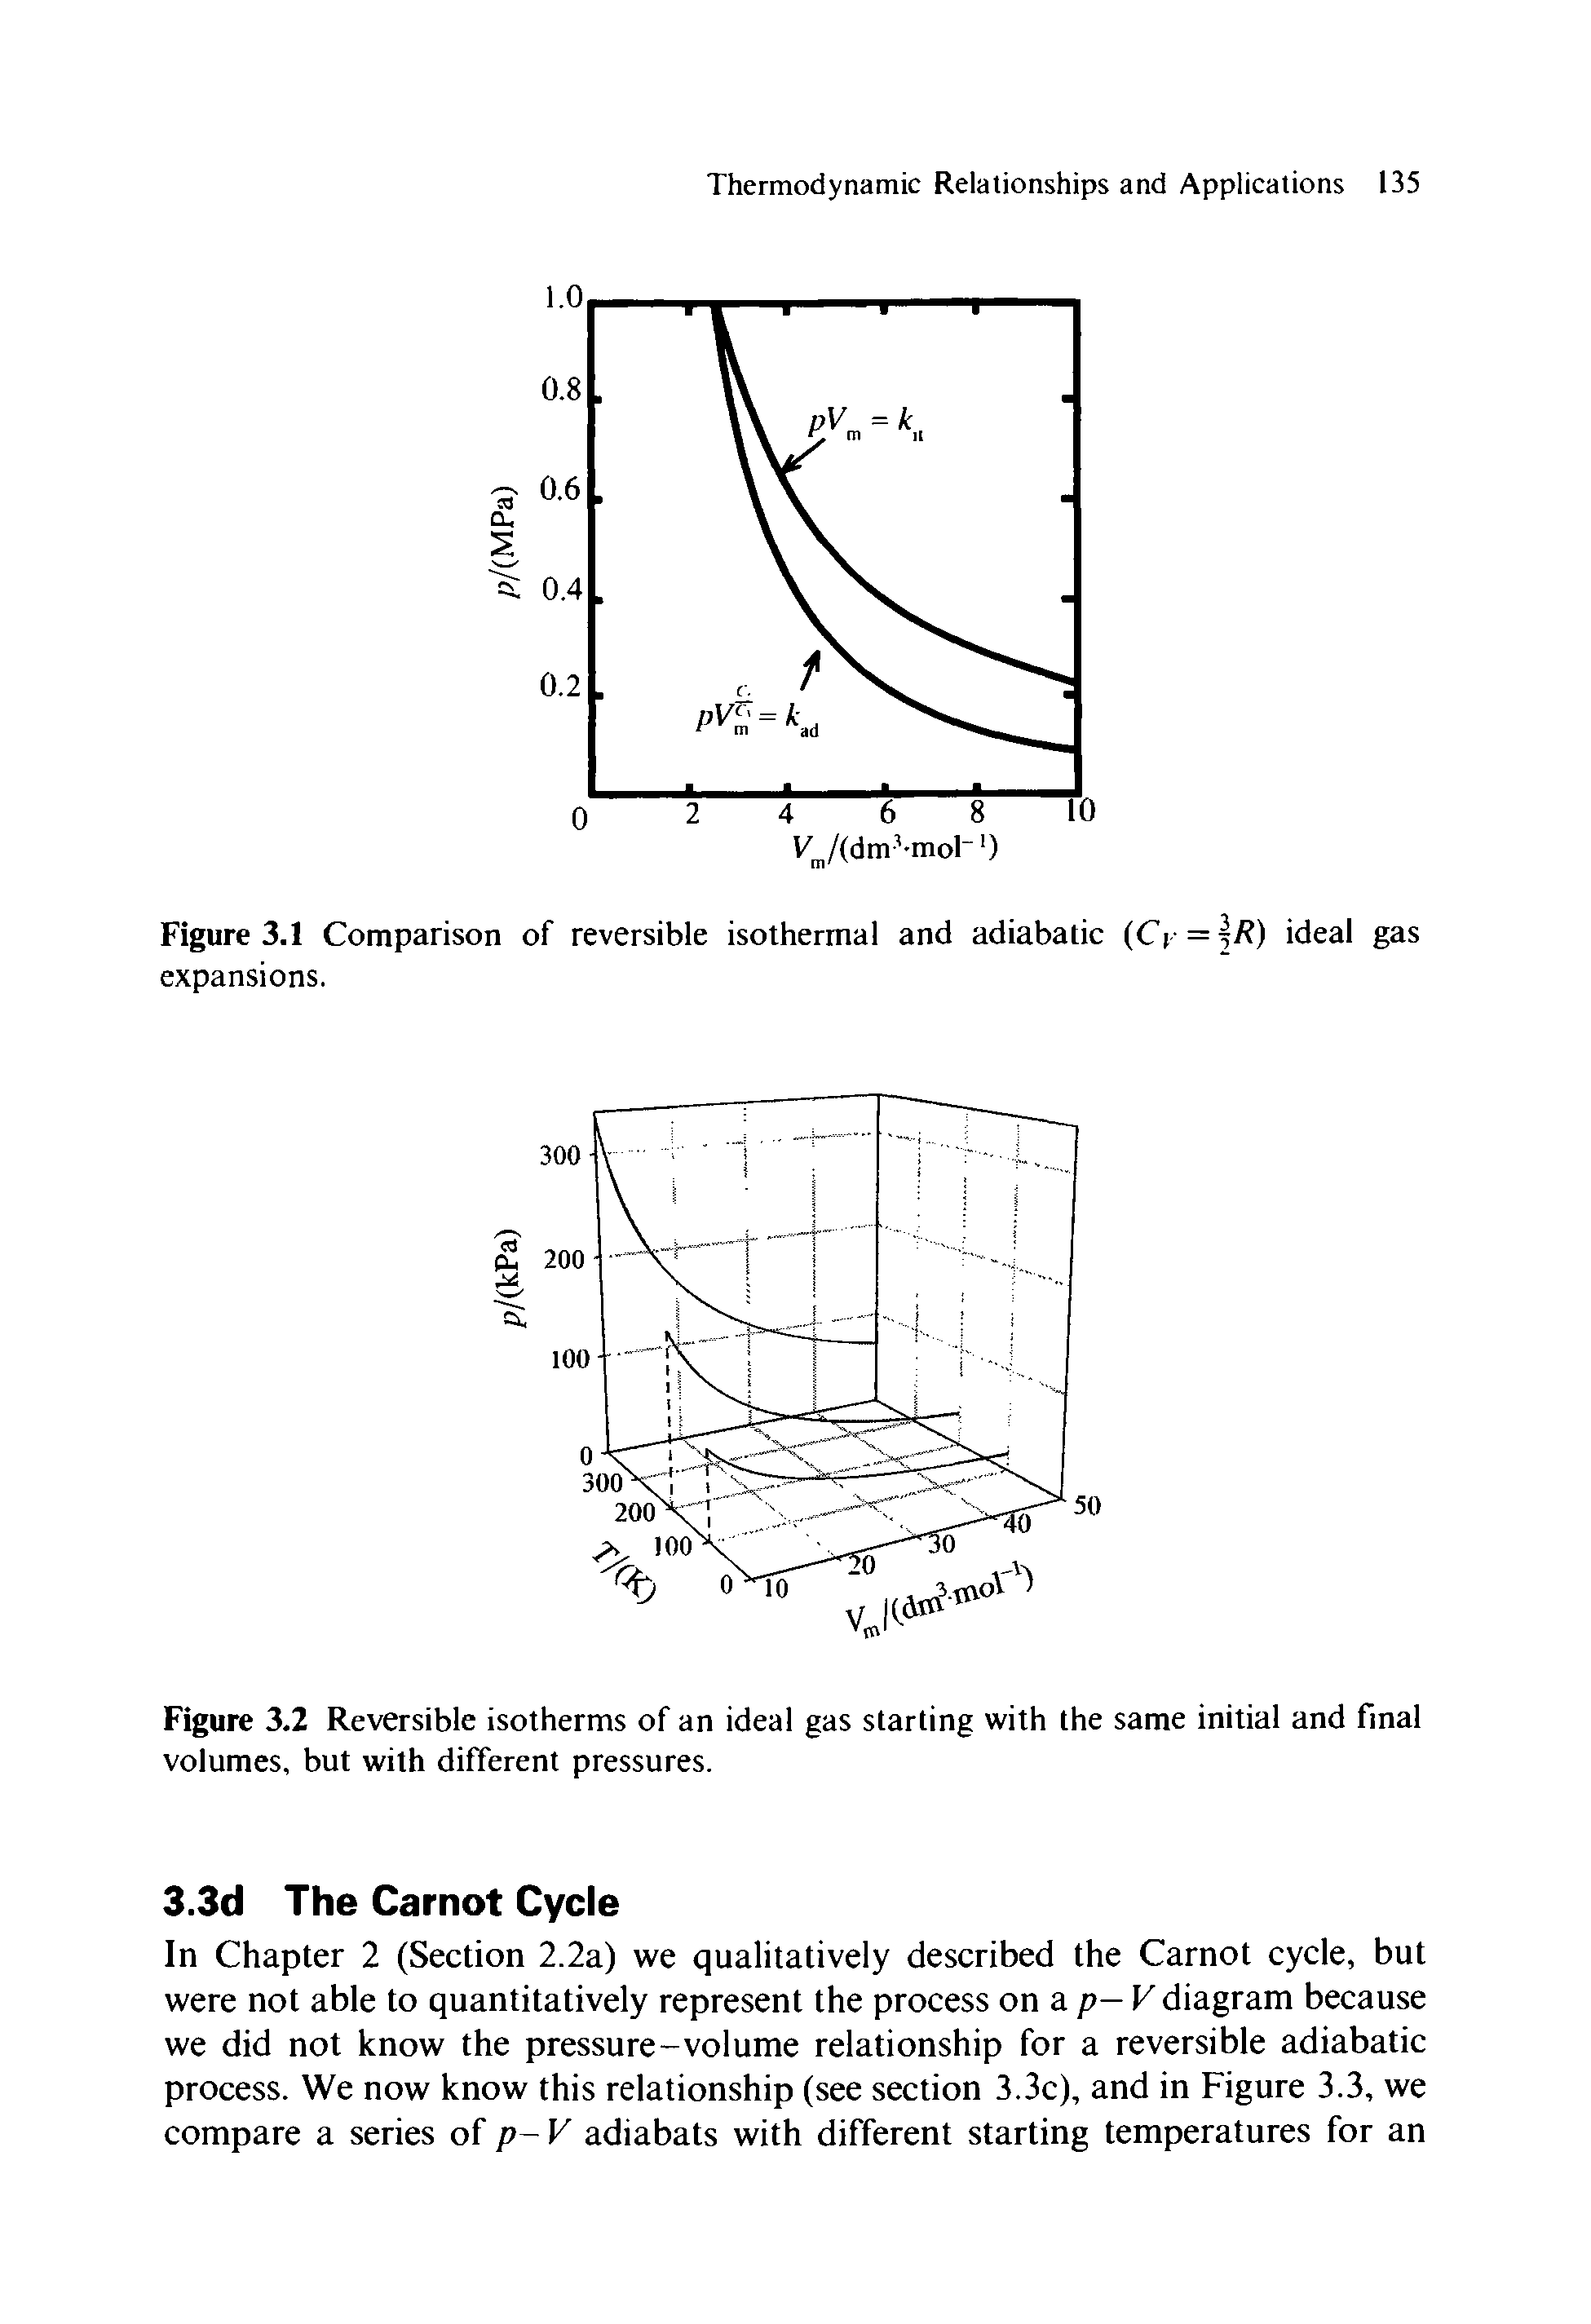 Figure 3.2 Reversible isotherms of an ideal gas starting with the same initial and final volumes, but with different pressures.